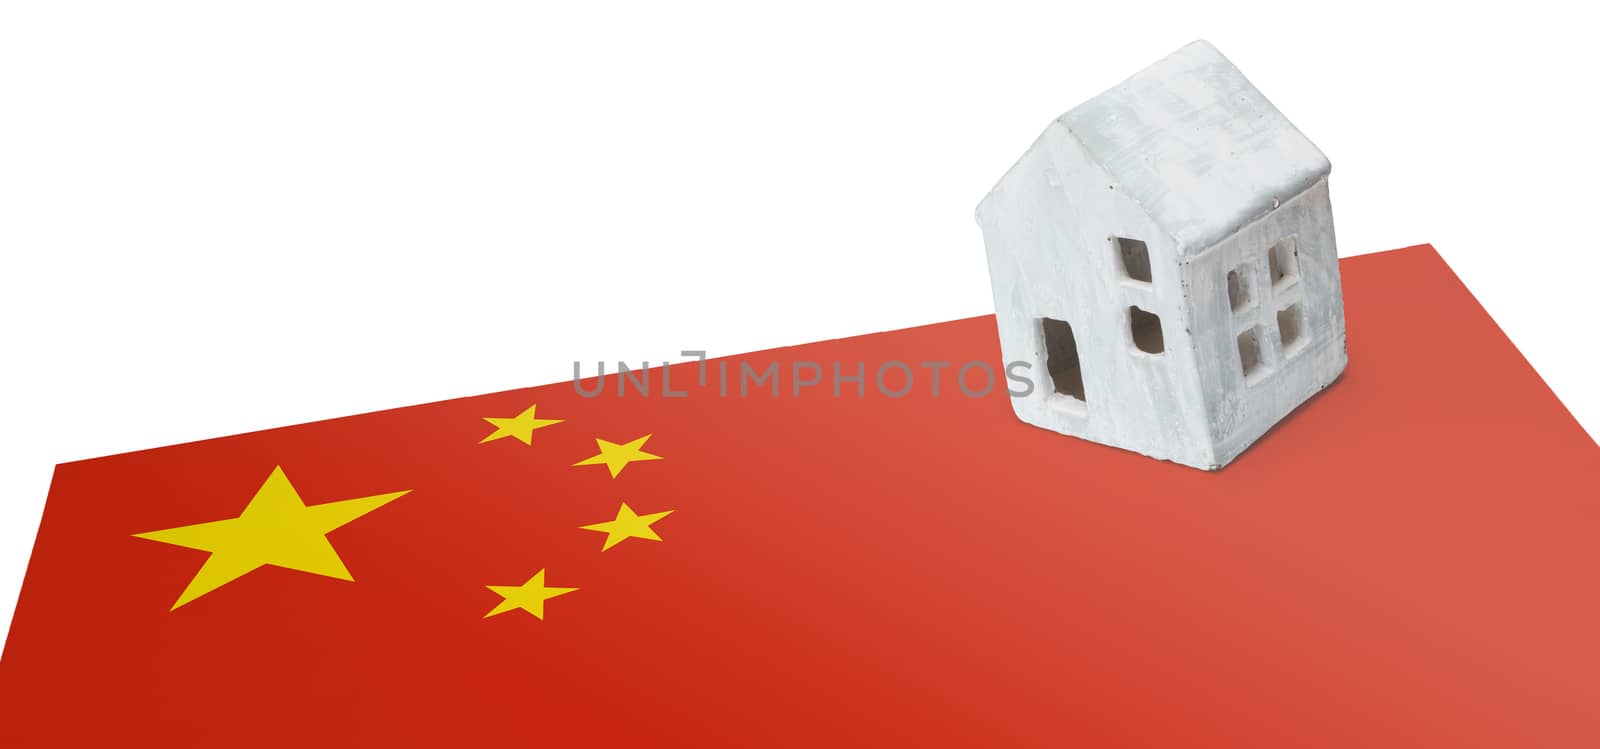 Small house on a flag - China by michaklootwijk